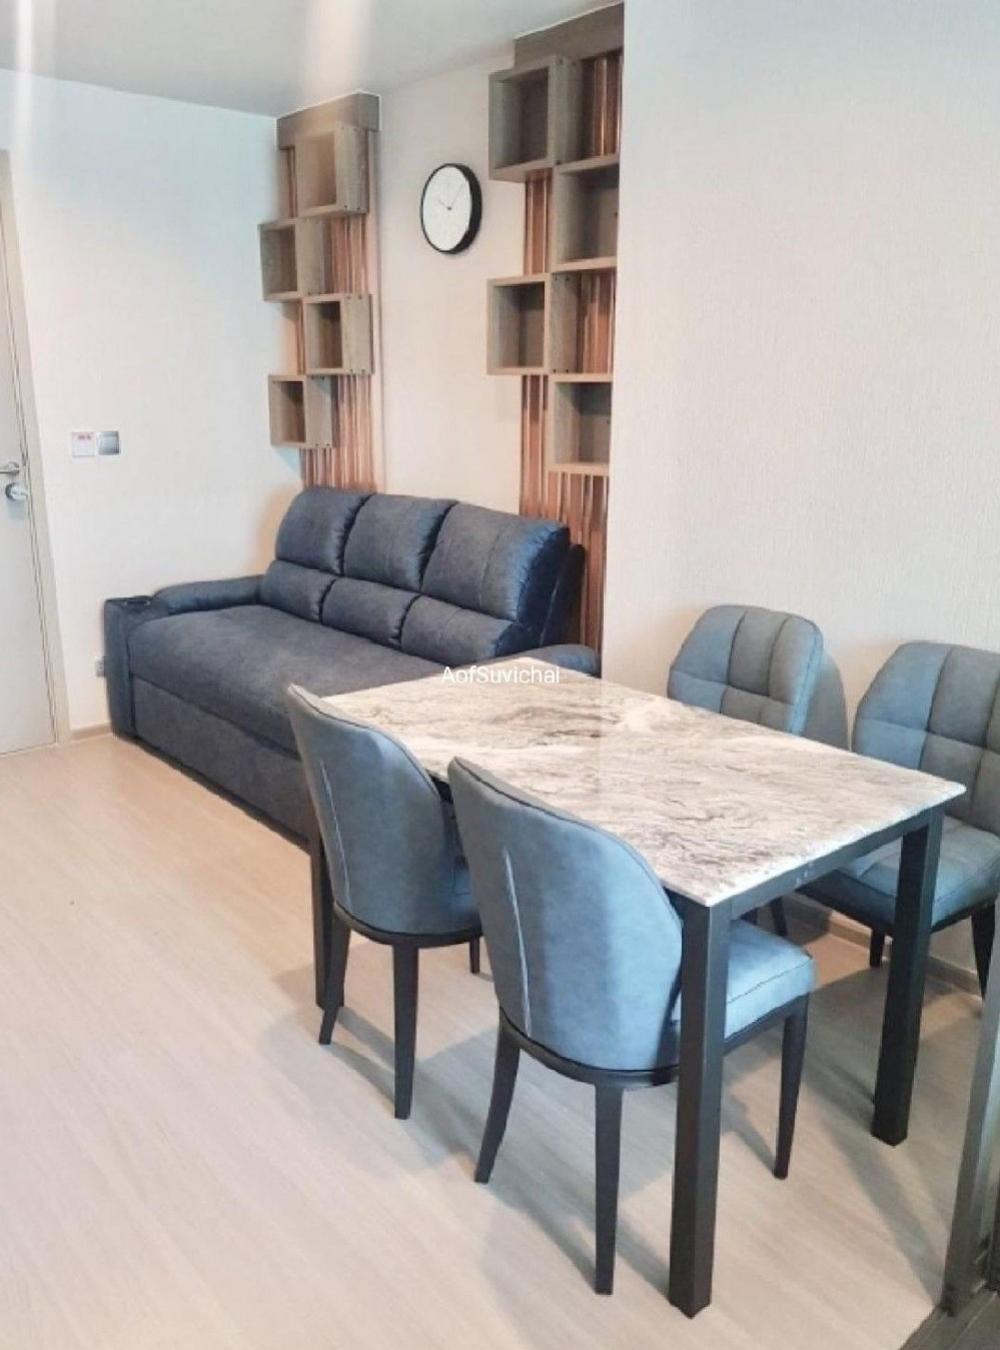 For RentCondoLadprao, Central Ladprao : Condo for rent Life Ladprao,💥east balcony💥, 2 Smart TV 55“, 6 feet bed, next to the department store, next to BTSSize 35.5 sq.m., Building B, Floor 40+💰 Rental price 19,000 baht / month